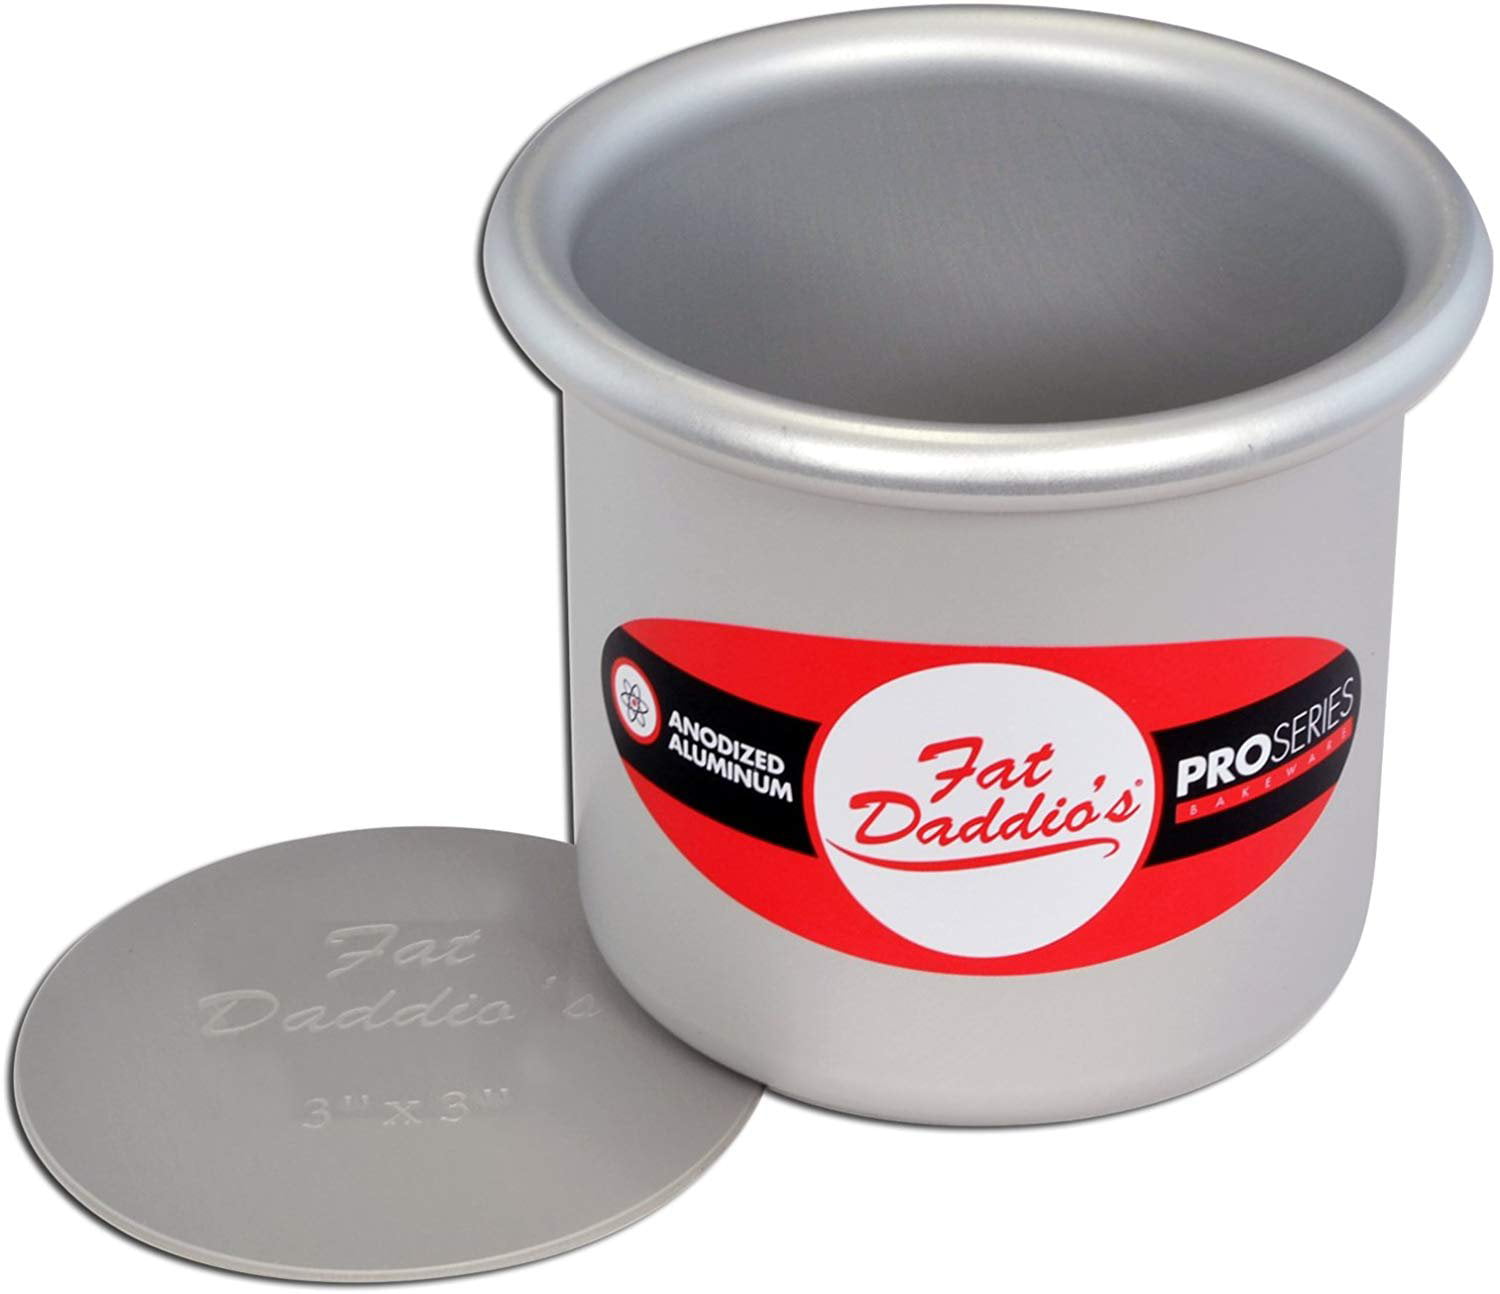 Fat Daddio's Anodized Aluminum Round Cheesecake Pan with Loose Bottom 3" deep 